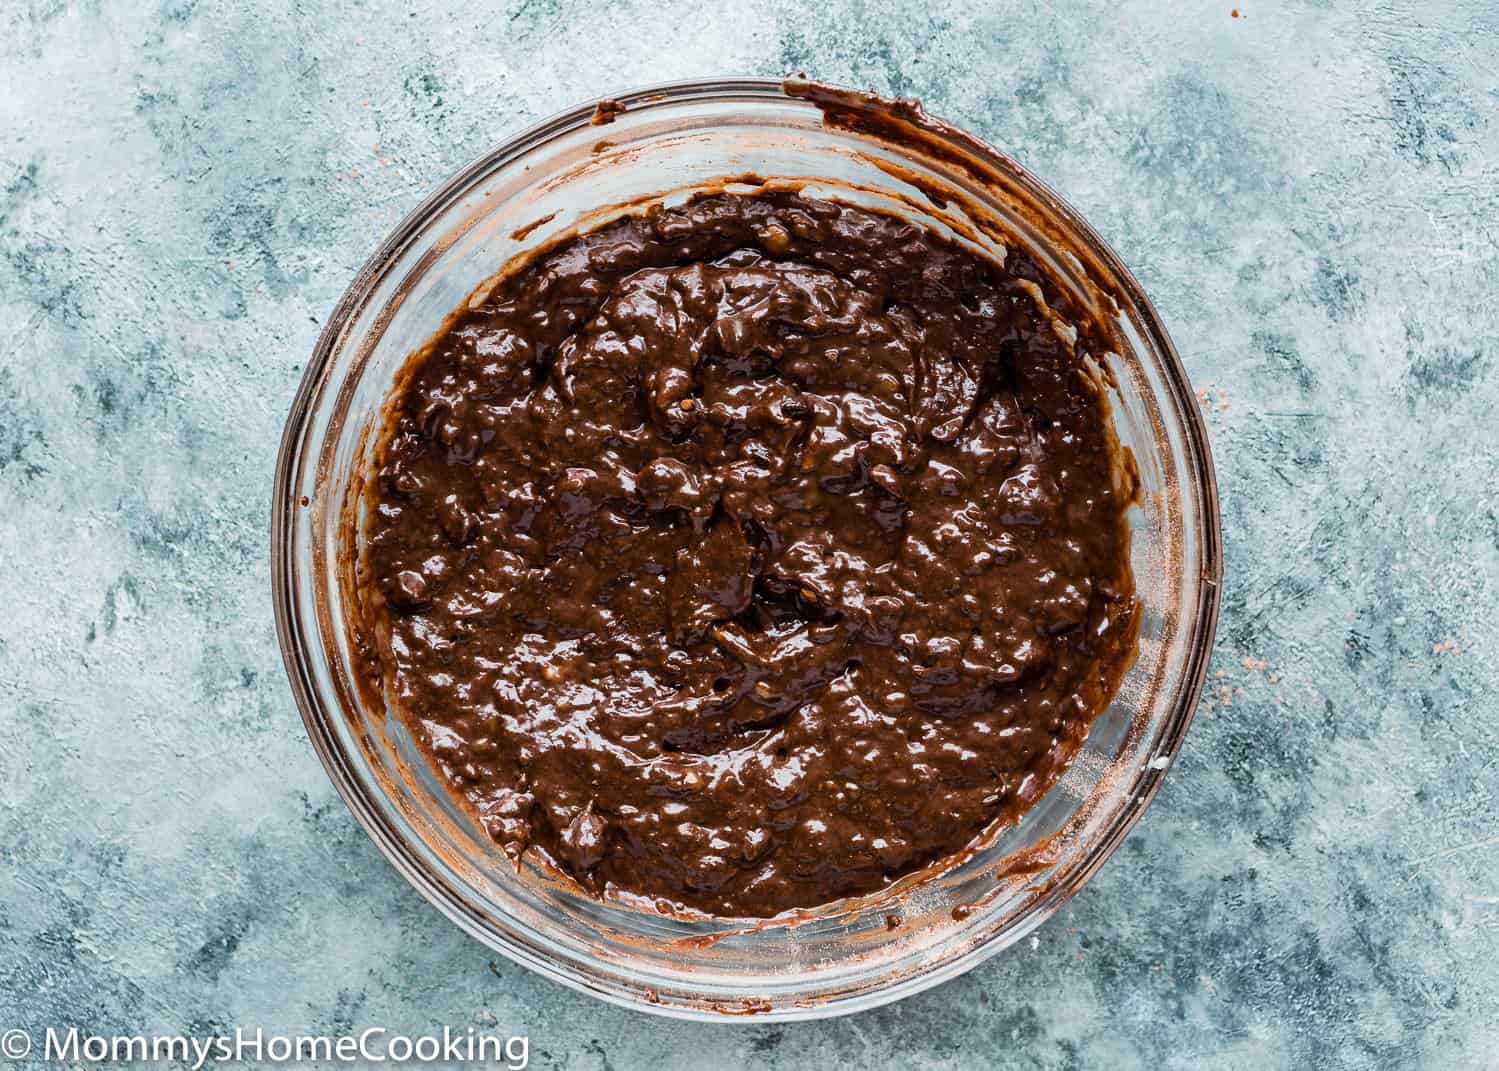 Egg-Free Chocolate Banana Bread batter in a bowl.